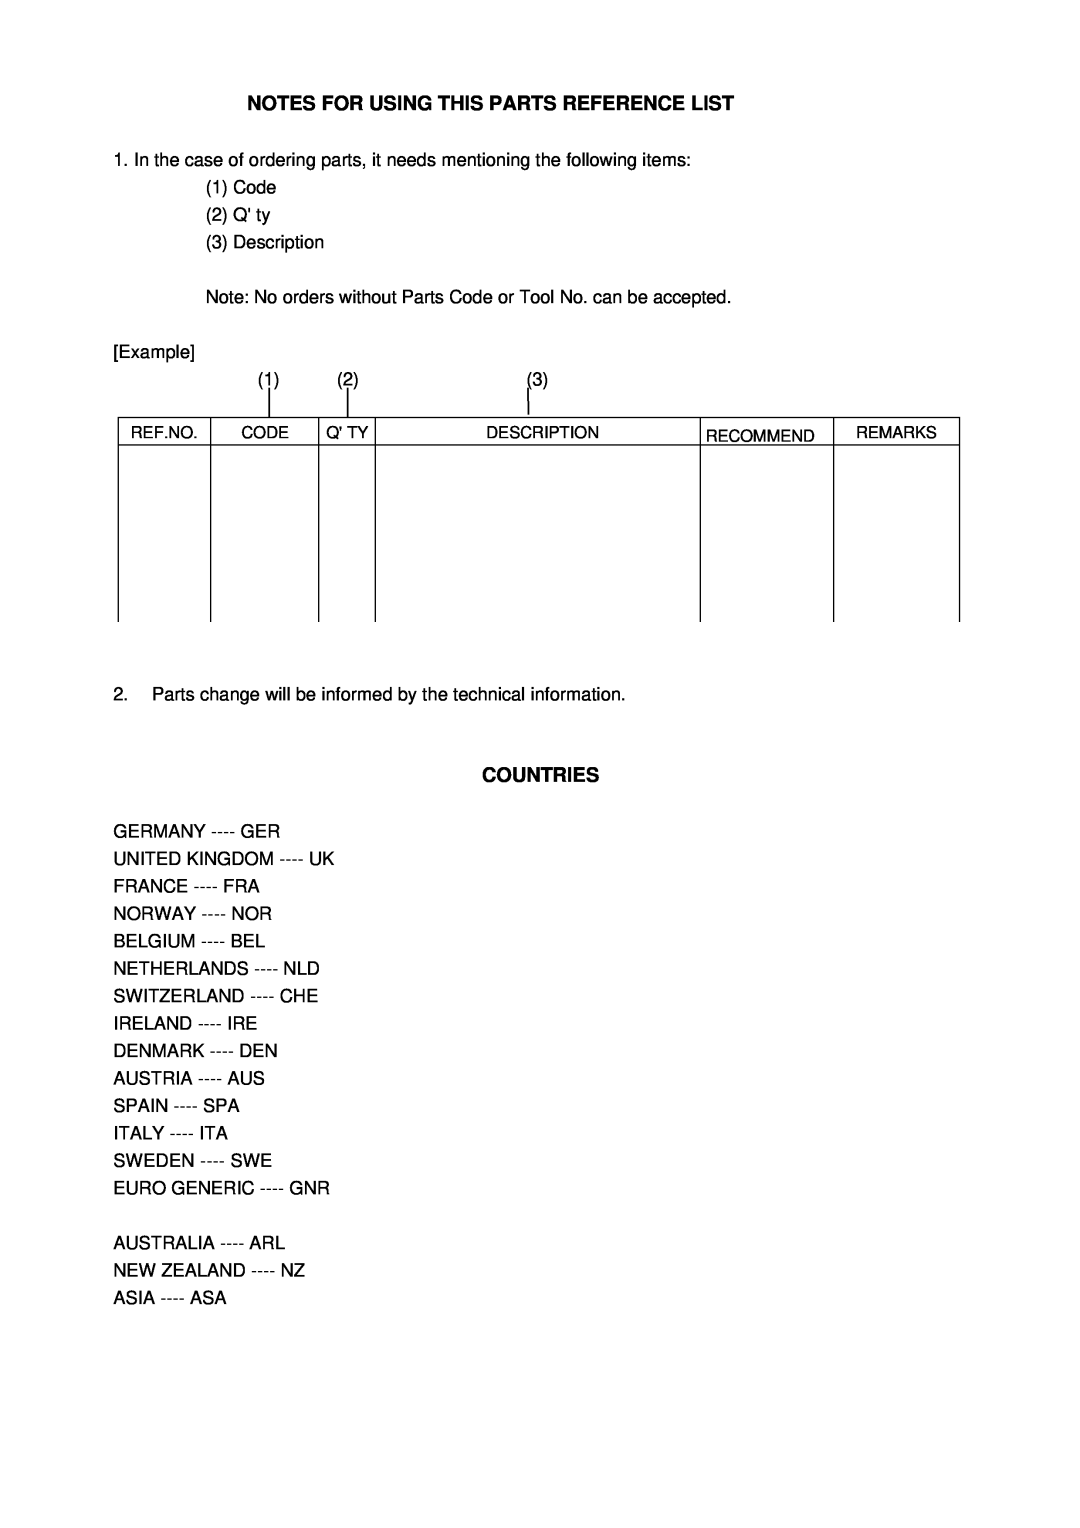 Brother MFC9860, 9880 manual Notes For Using This Parts Reference List, Countries 